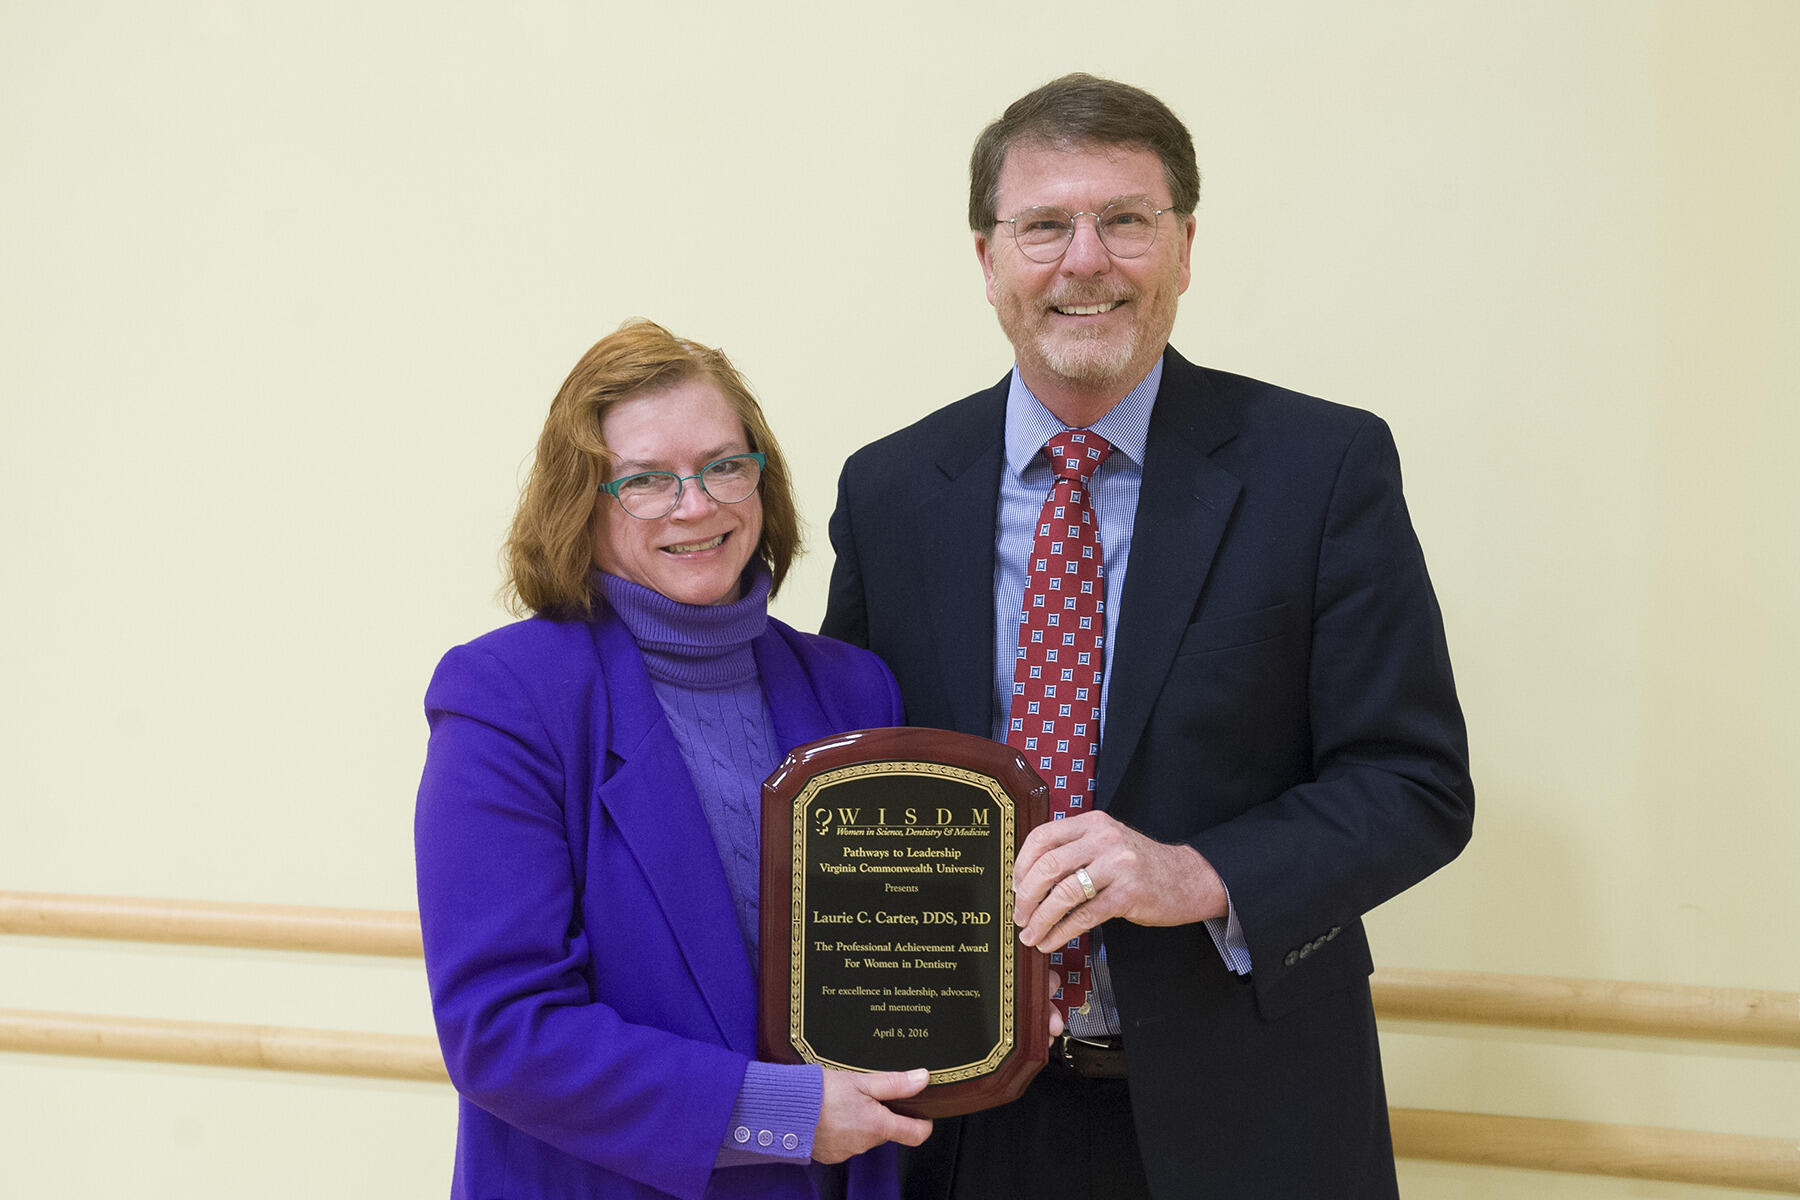 Laurie C. Carter, D.D.S., Ph.D., (left) accepted the WISDM Professional Achievement Award this year from VCU School of Dentistry Dean David Sarrett, D.M.D. Photo by Thomas Kojcsich, University Marketing.